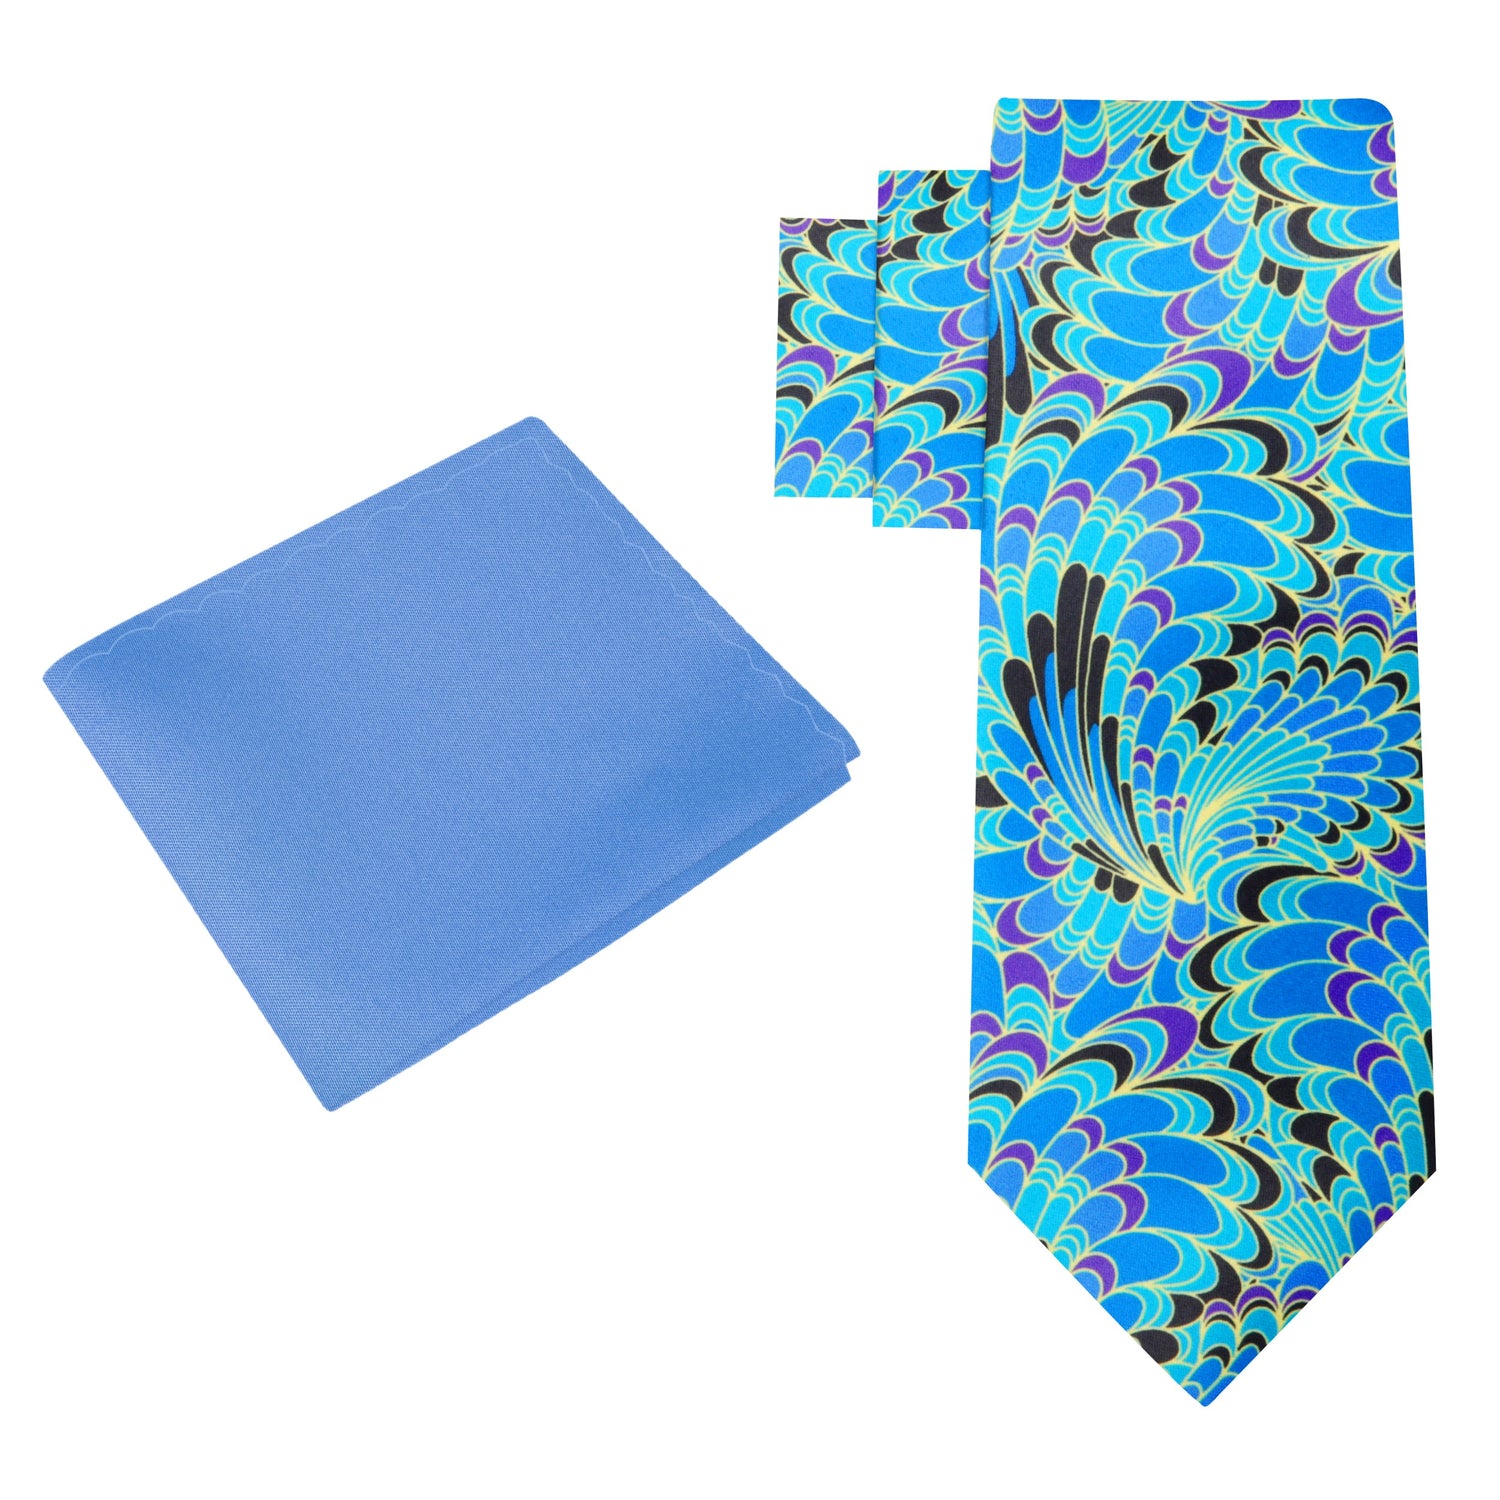 Alt View: Blue, Black, Yellow, Purple Peacock Feathers Necktie with Light Blue Square